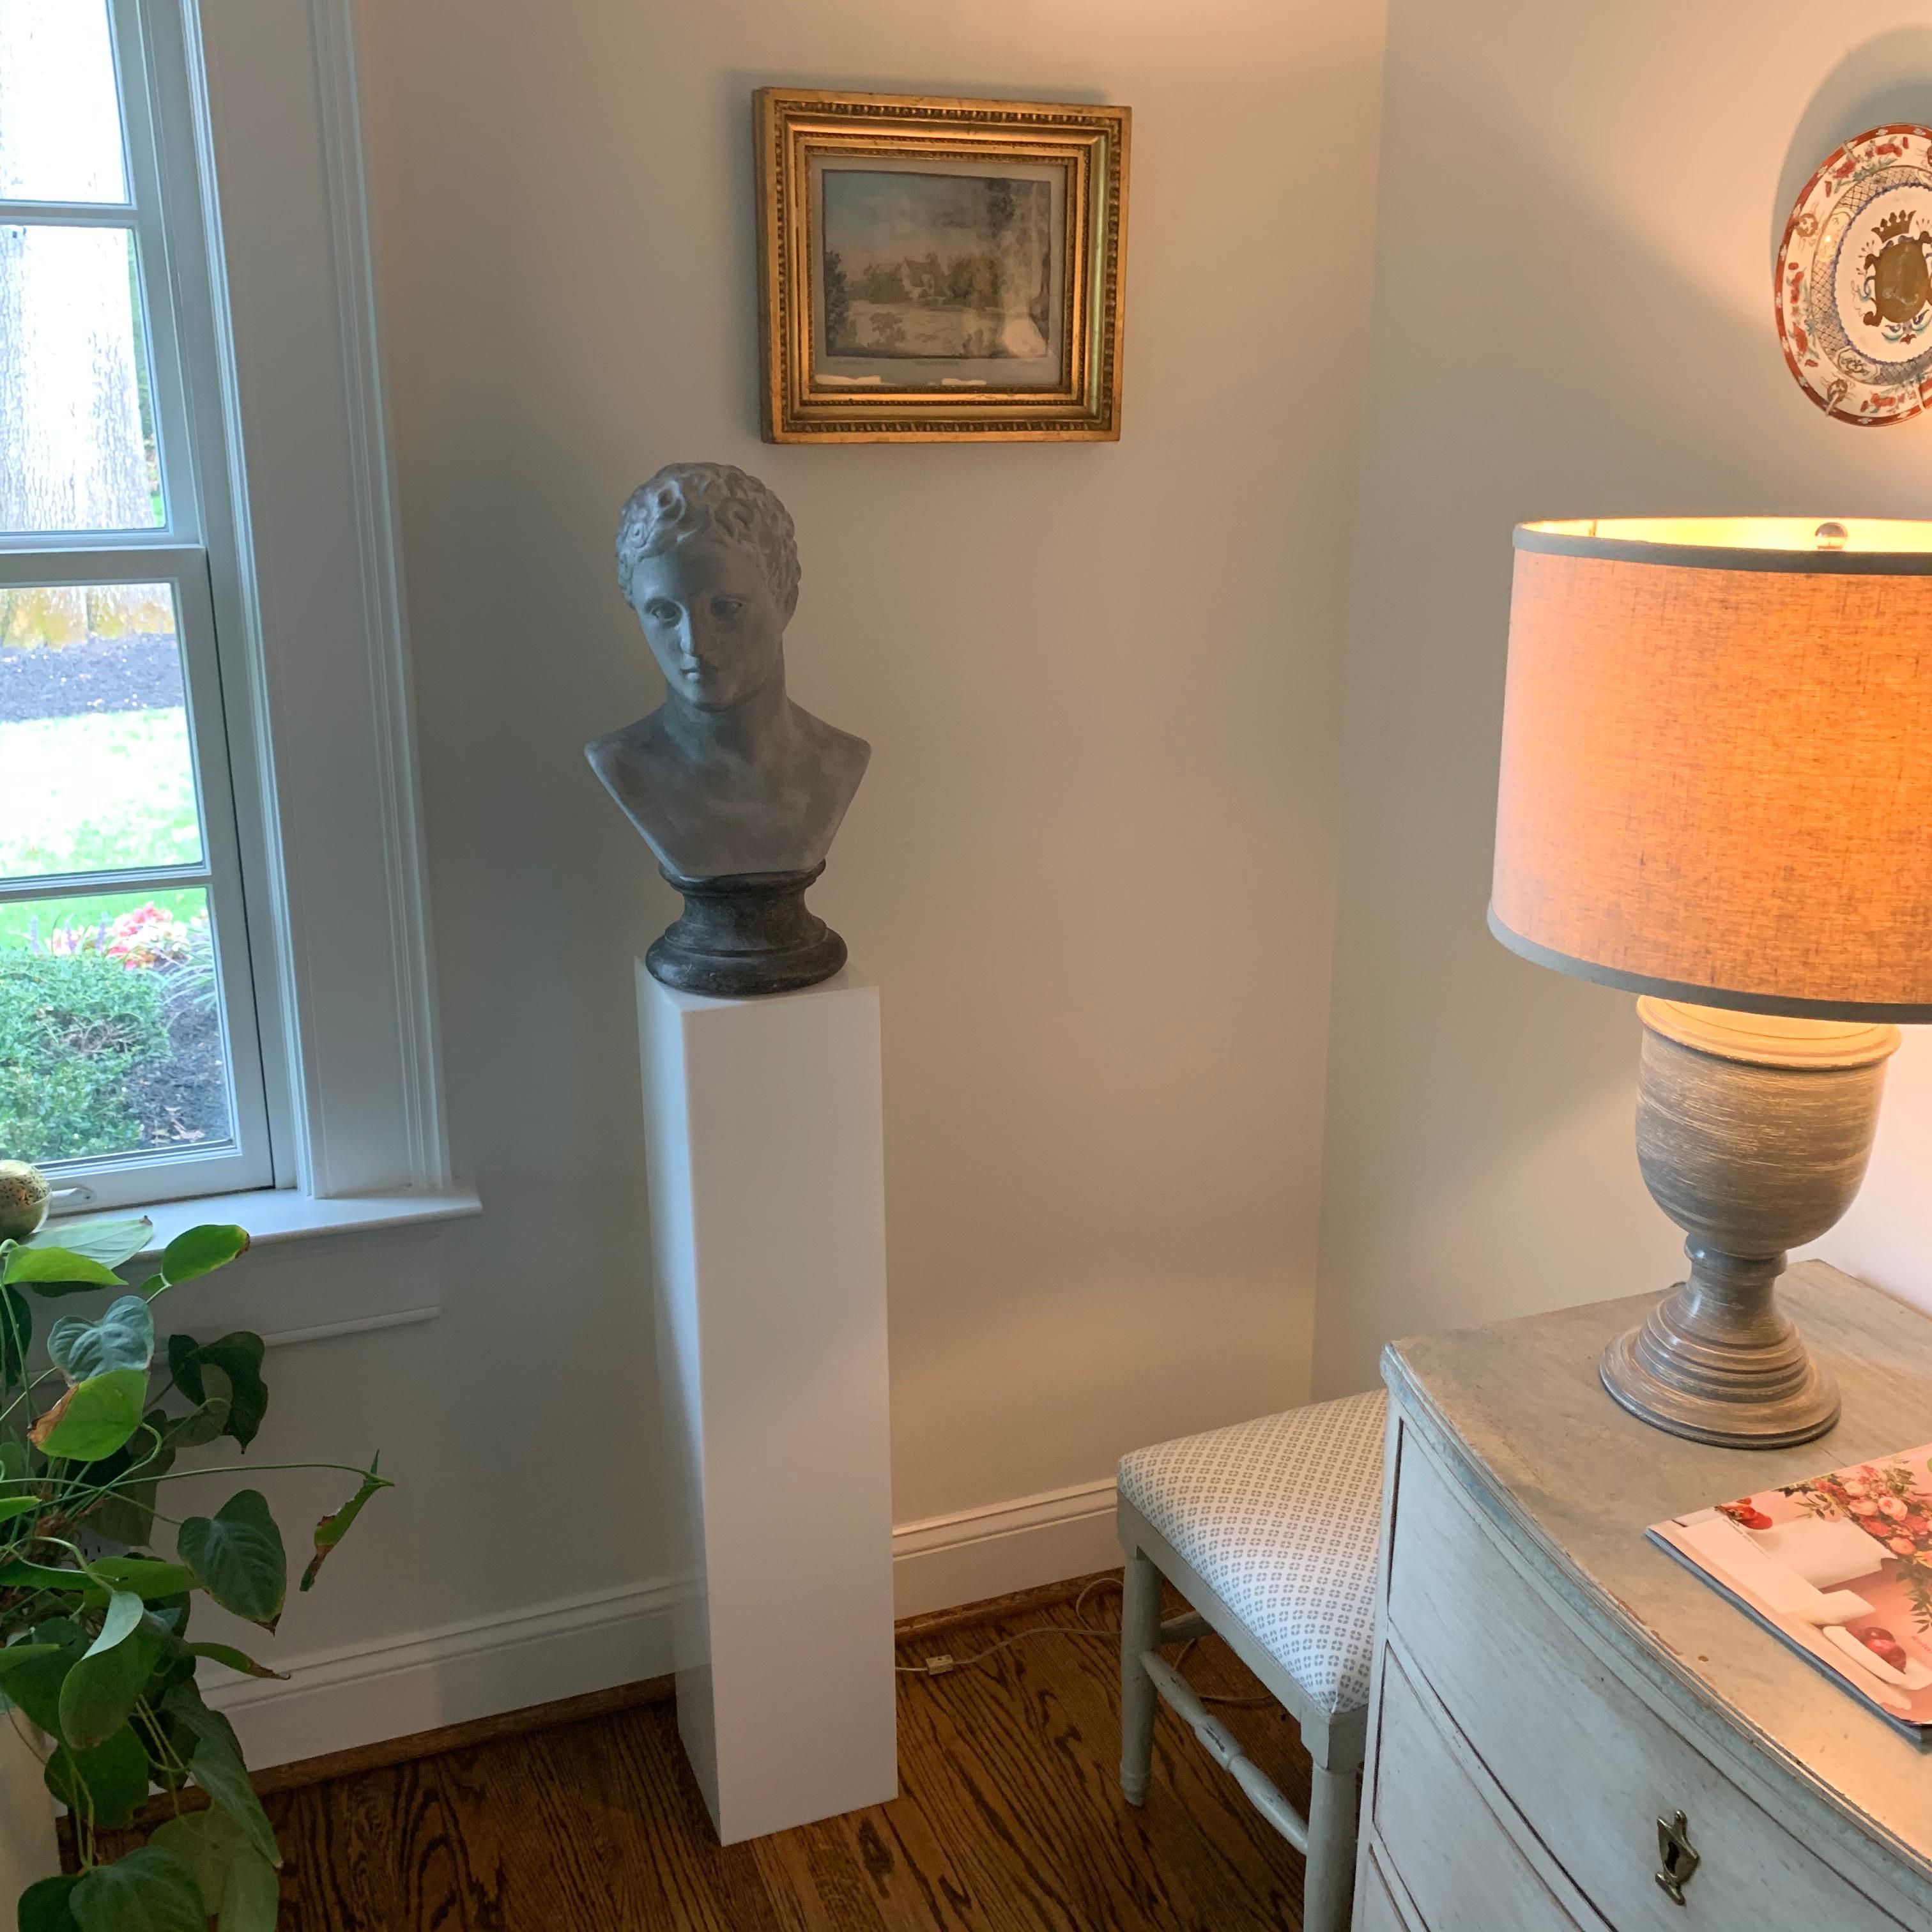 Tall 1970s Electrified White Lucite Or Acrylic Pedestal Stand Display Column In Good Condition For Sale In Haddonfield, NJ